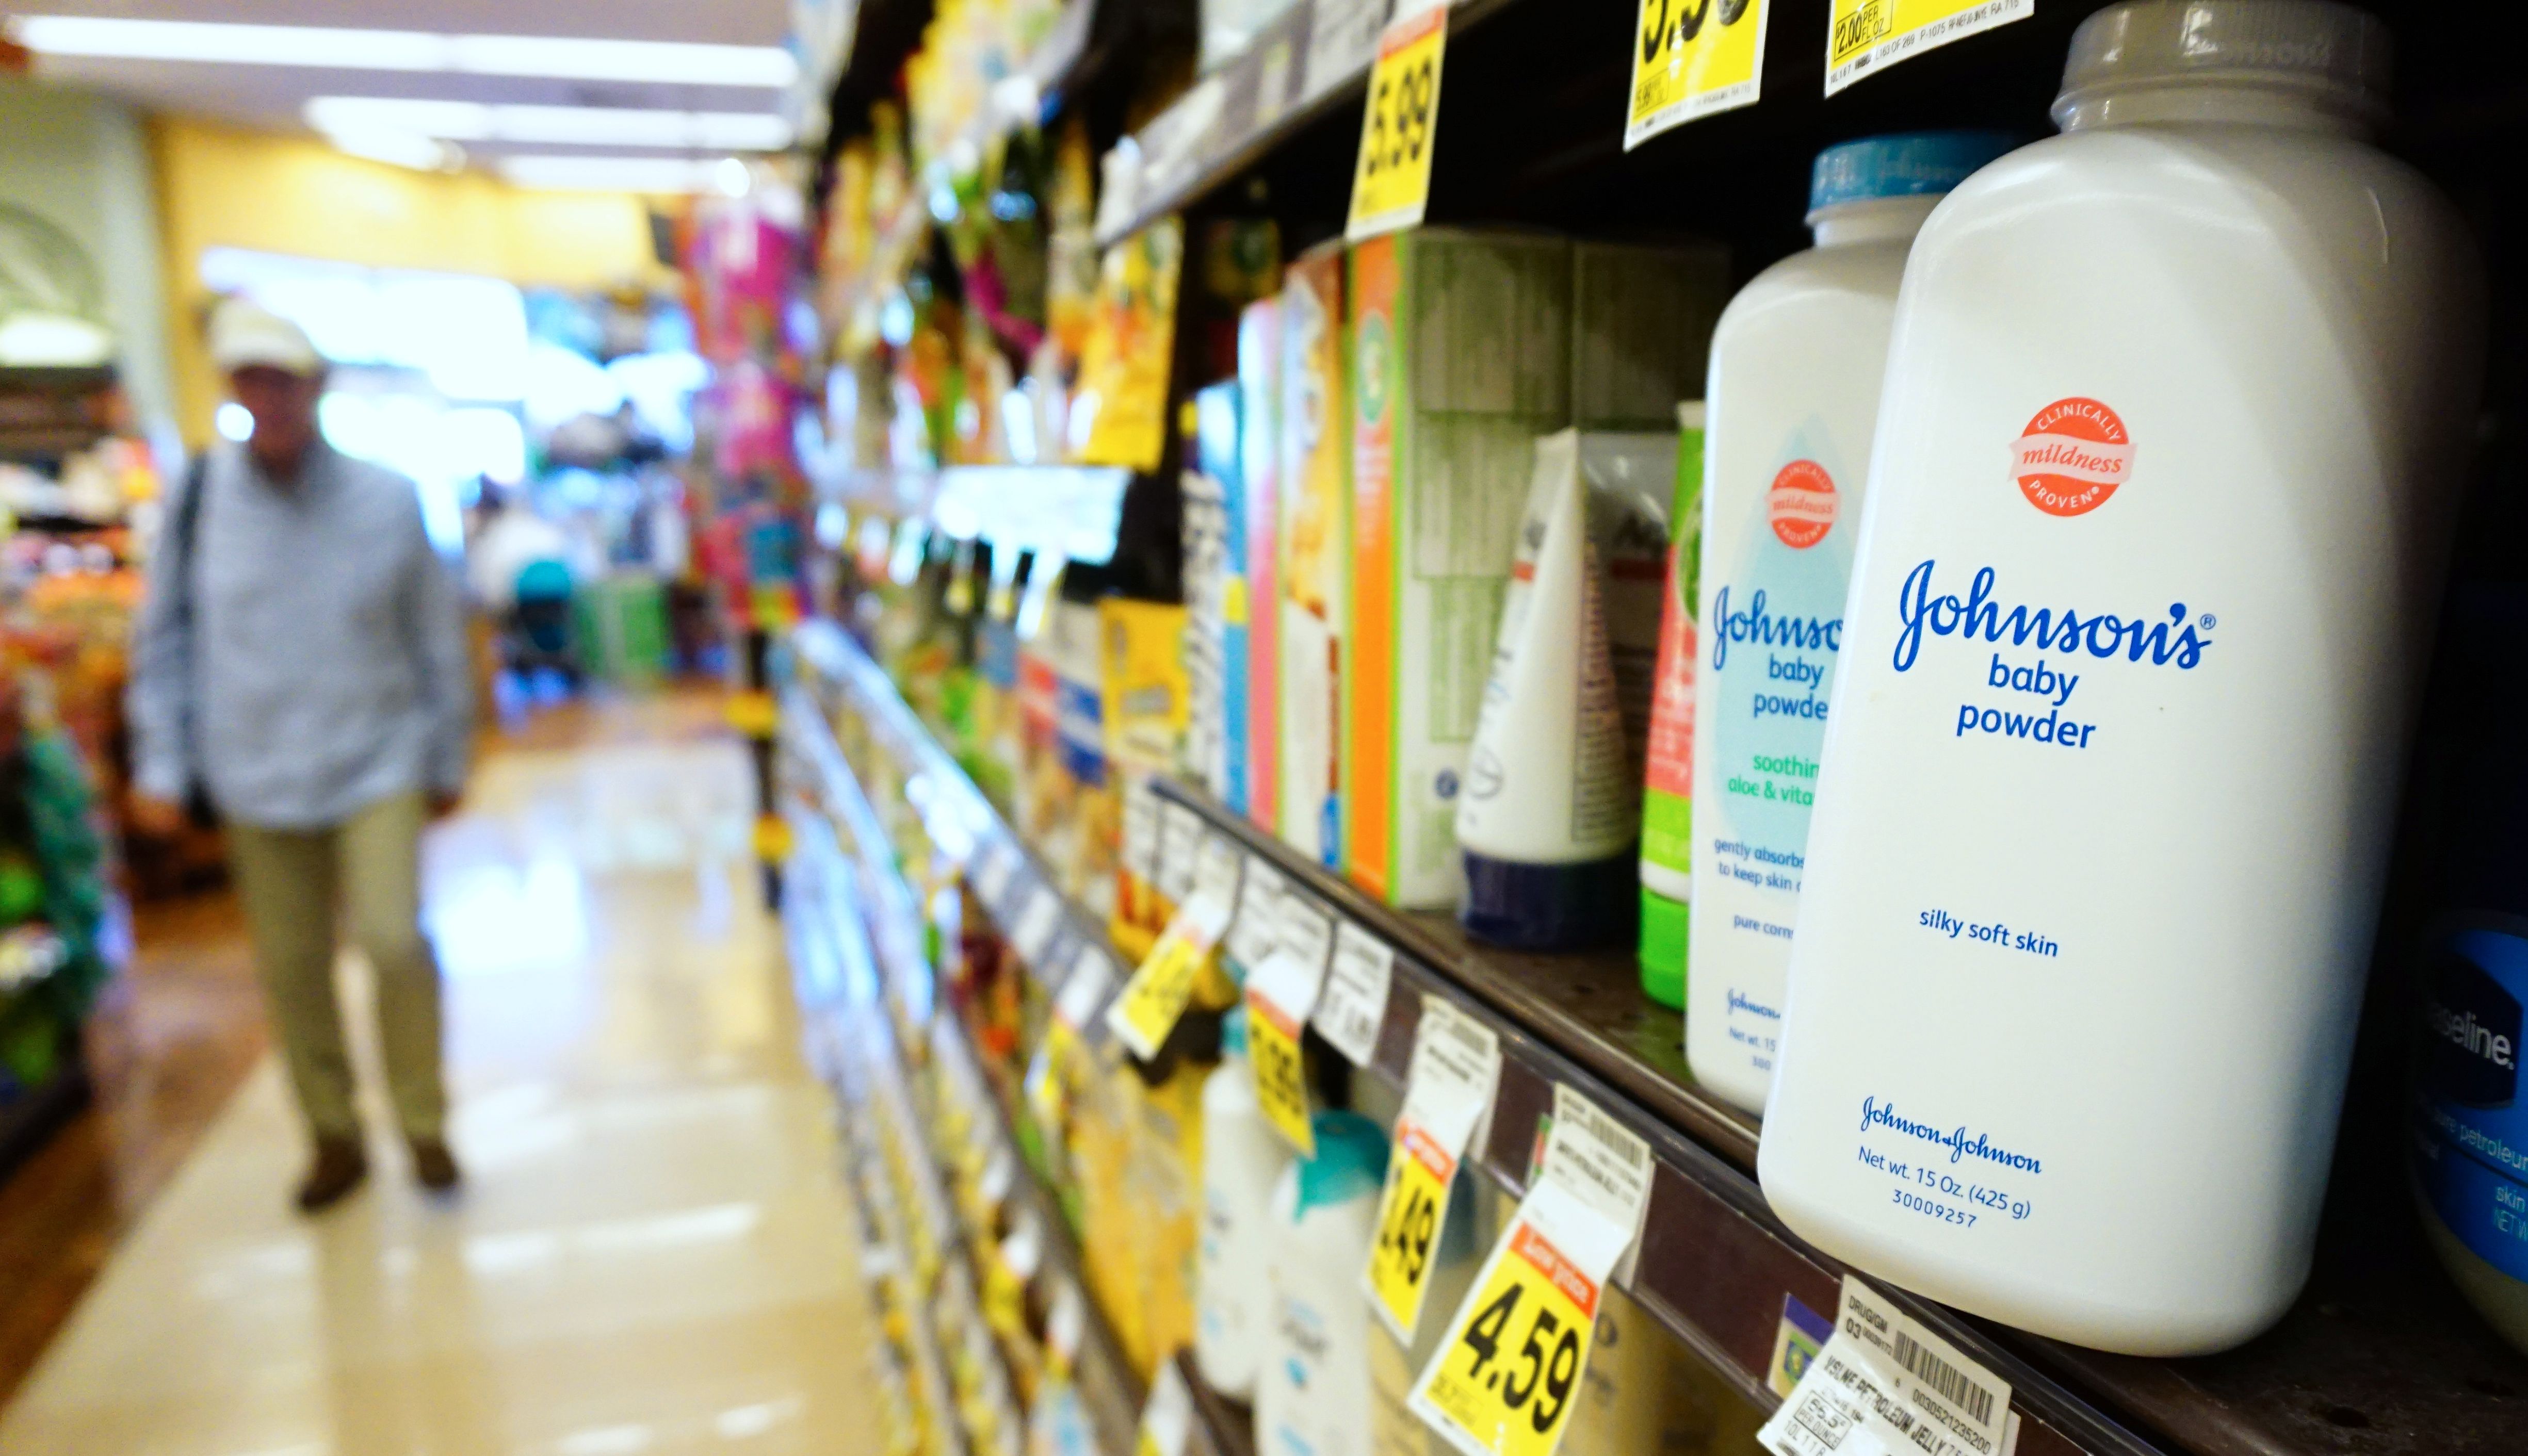 Indian regulator orders J&J to stop using raw material to make baby powder in India